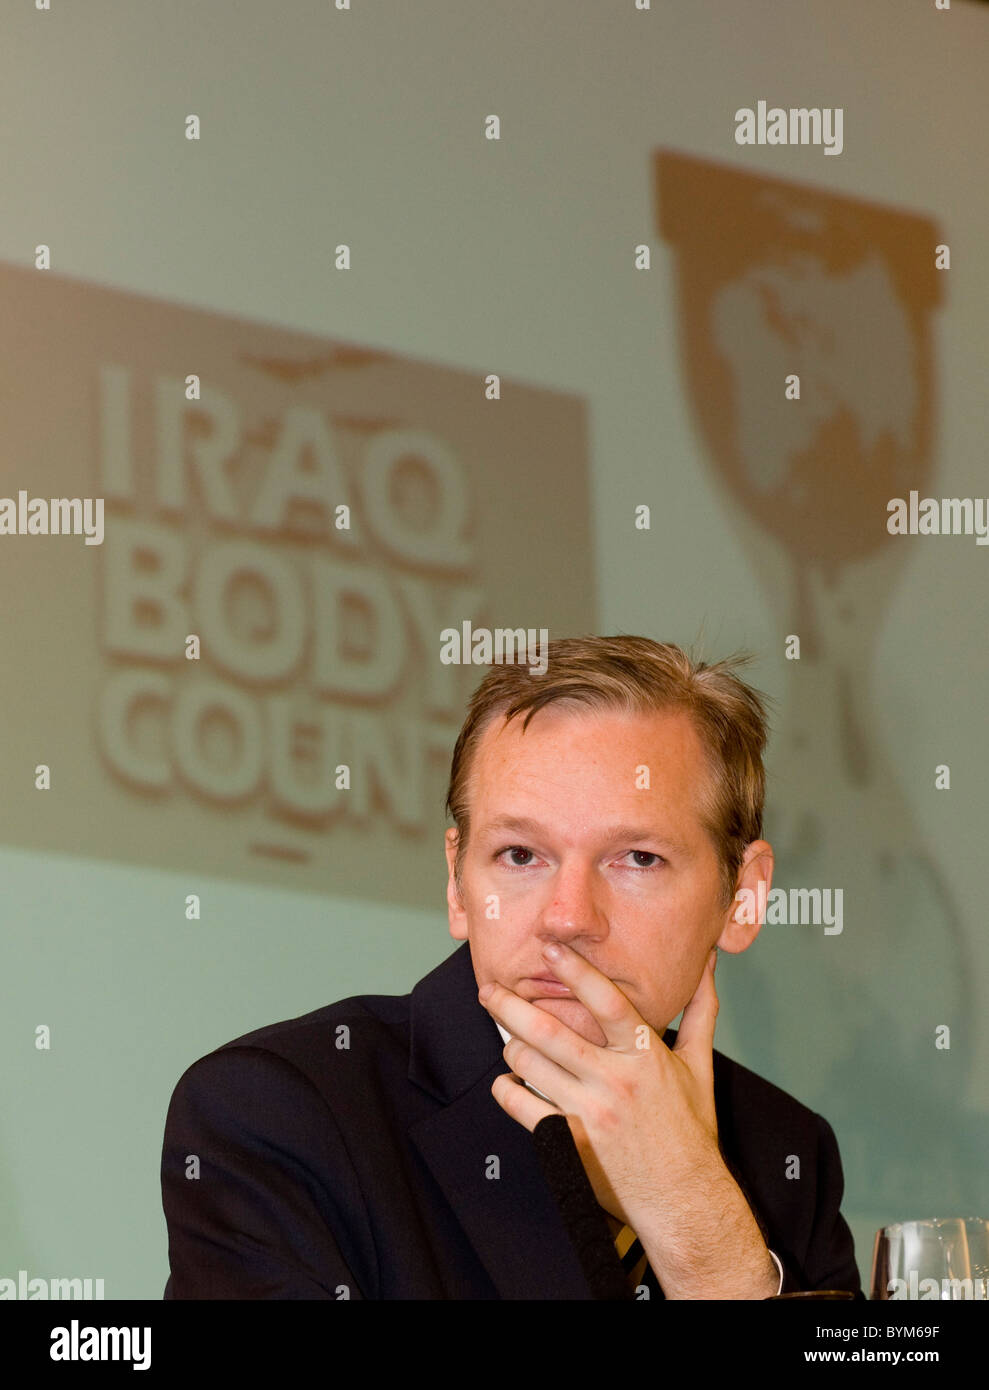 JULIAN ASSANGE, FOUNDER OF WIKILEAKS, EXPLAINING RELEASE OF IRAQ WARLOG AT A PRESS CONFERENCE IN WESTMINSTER. OCTOBER 2010. Stock Photo